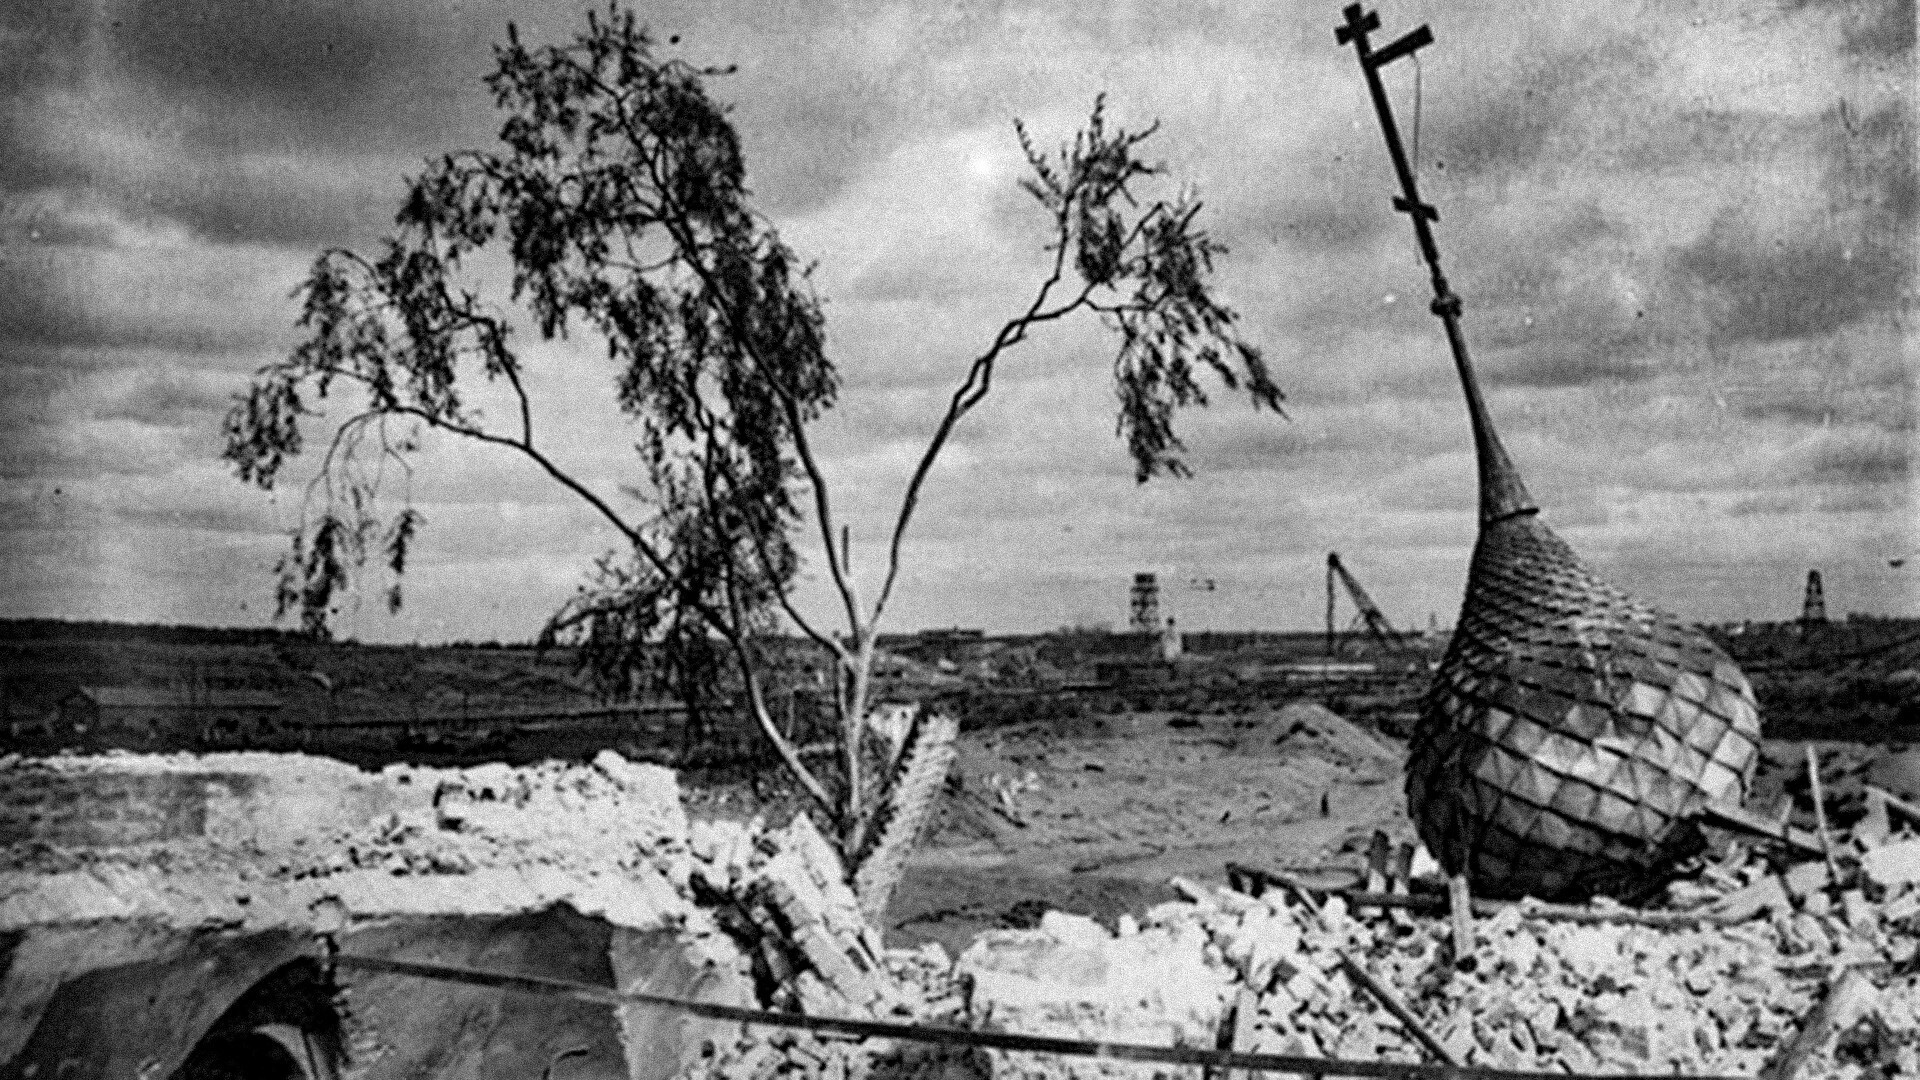 The remains of the demolished buildings of Mologa after the inundation started